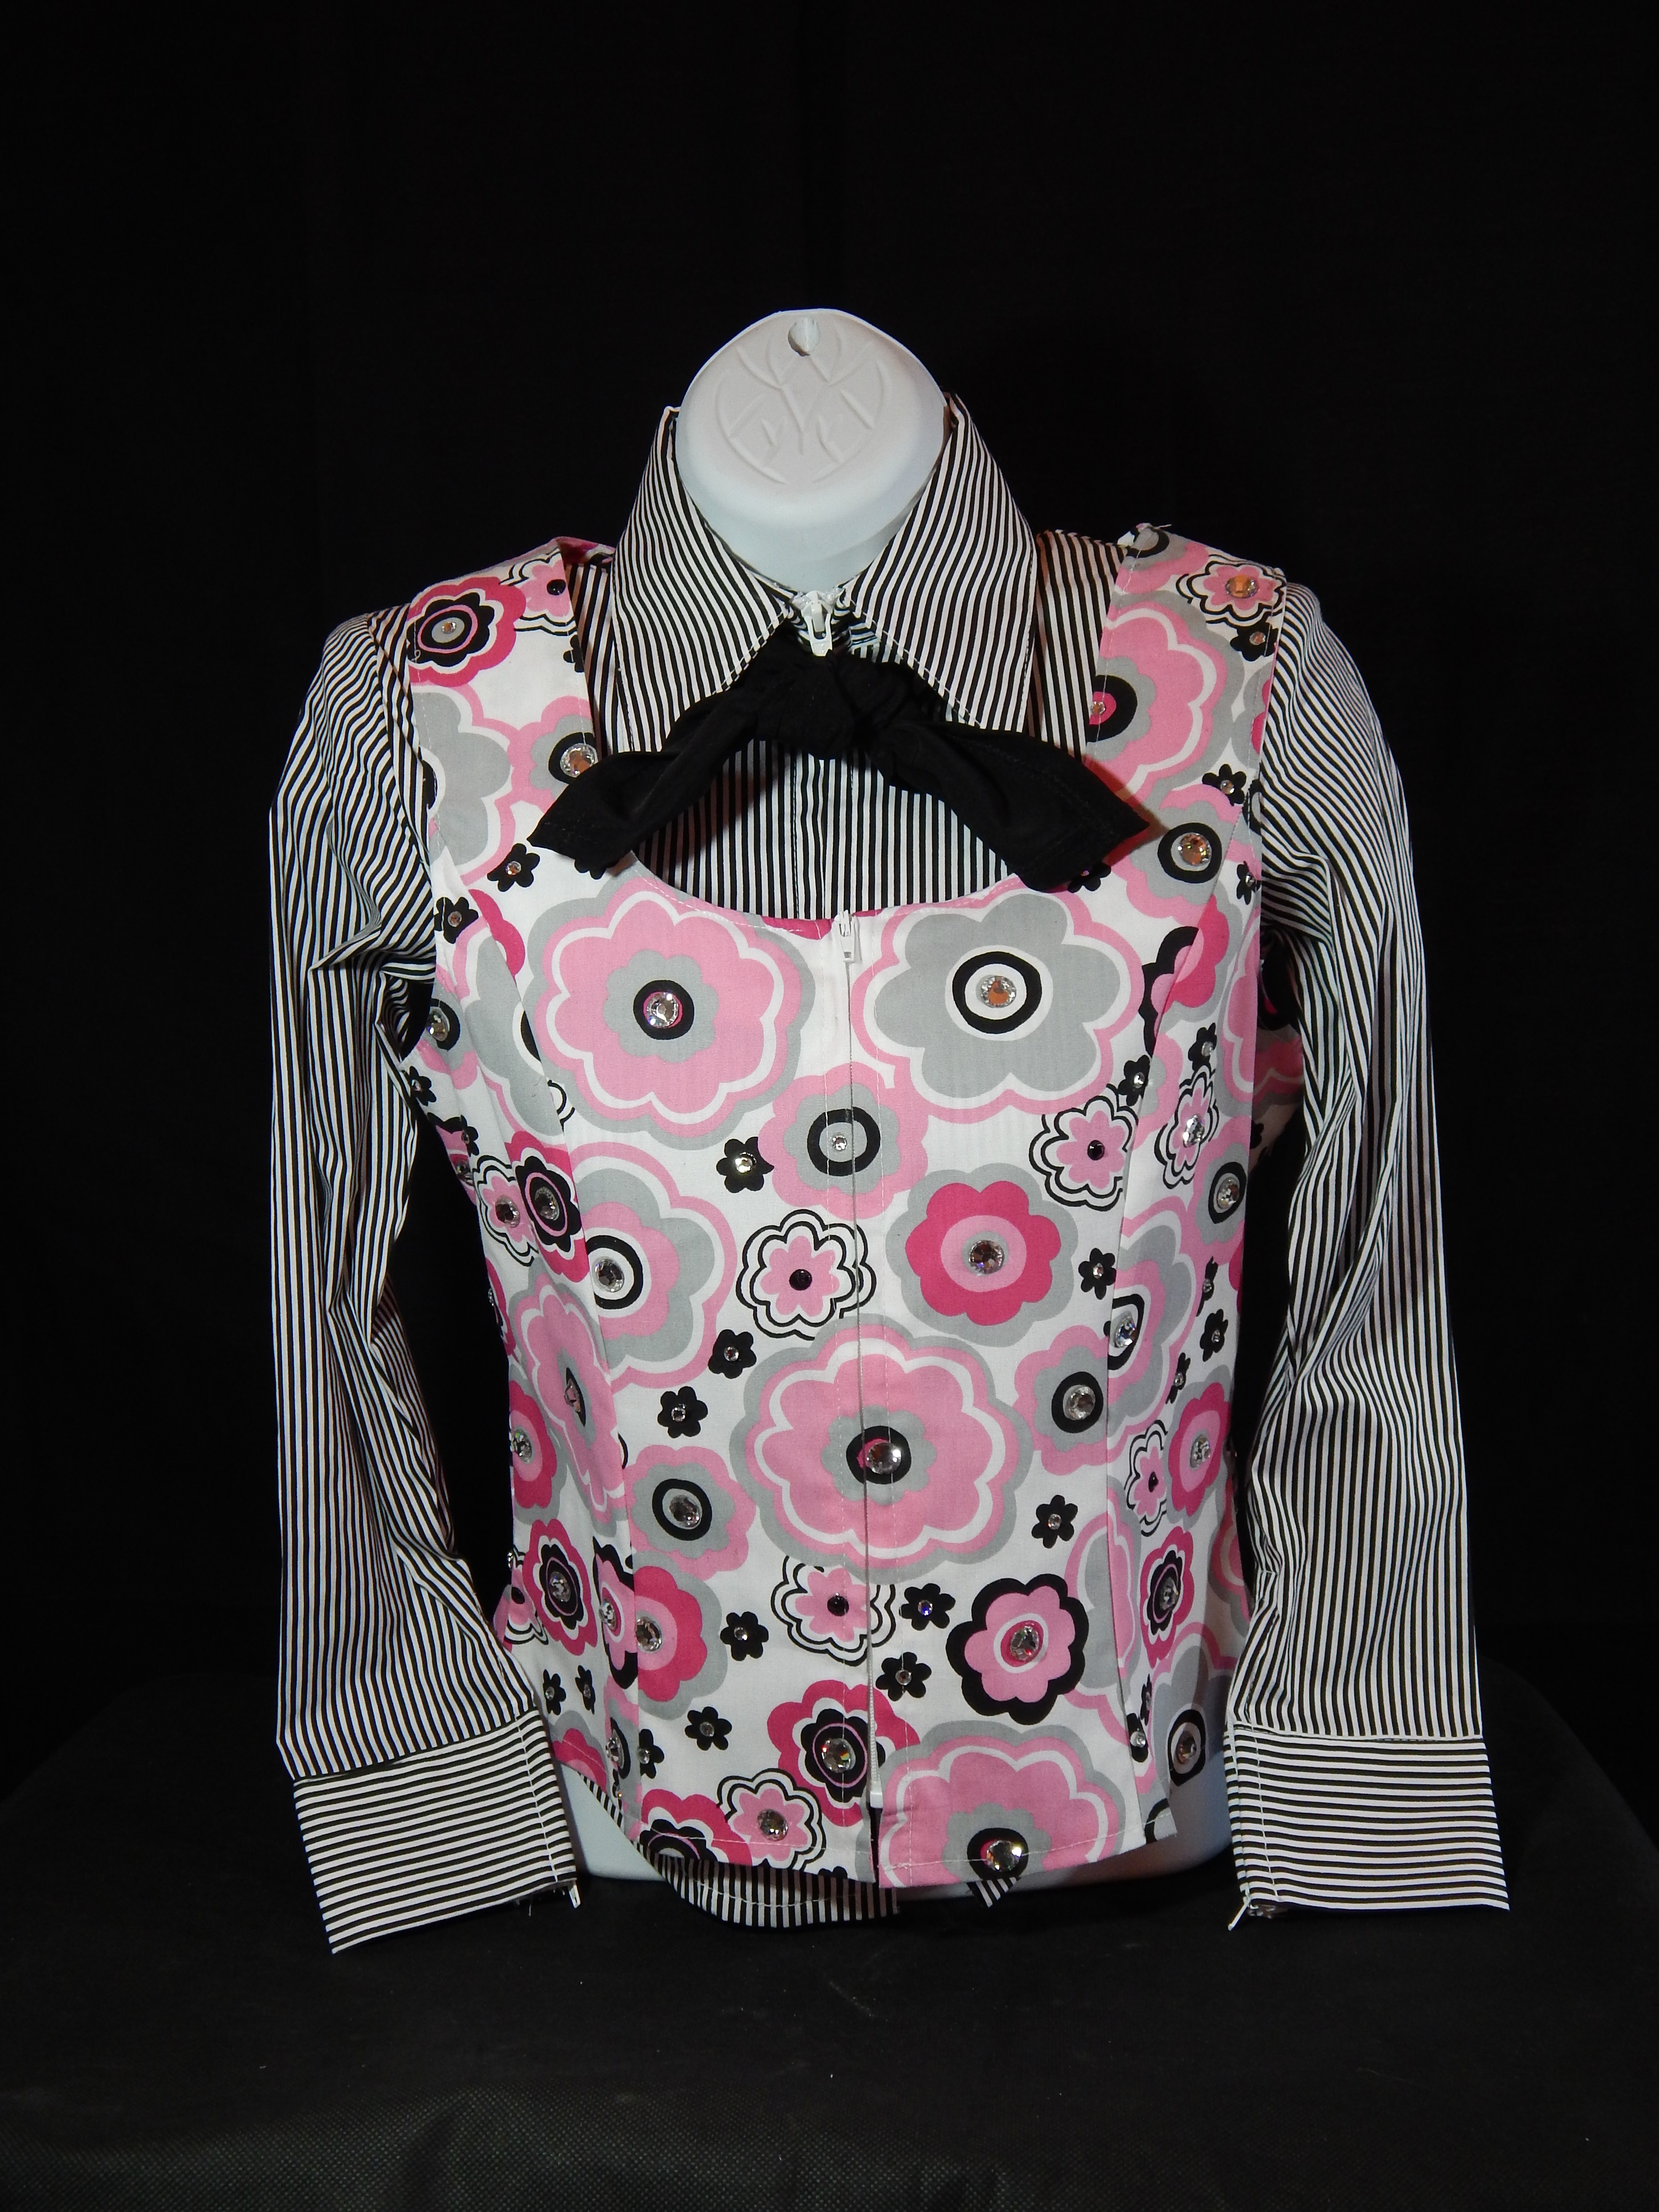 MKC YOUTH Horse Show Vest - Pink, Black, White, Gray Floral